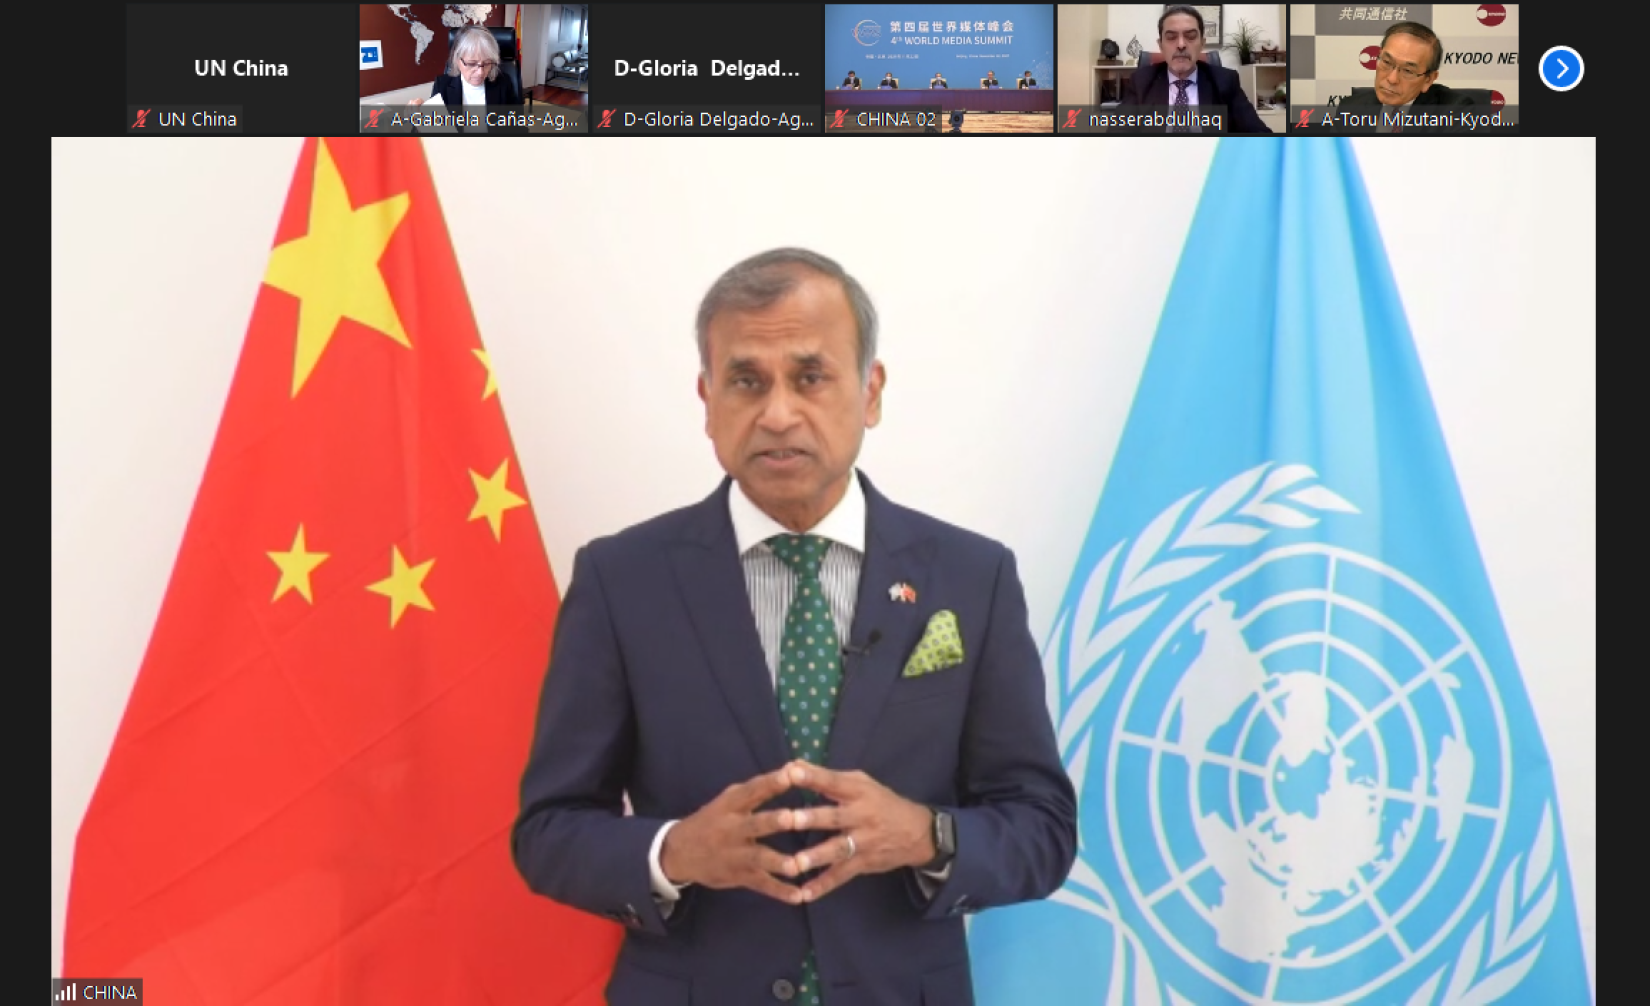 UN Resident Coordinator in China Siddharth Chatterjee at the World Media Summit